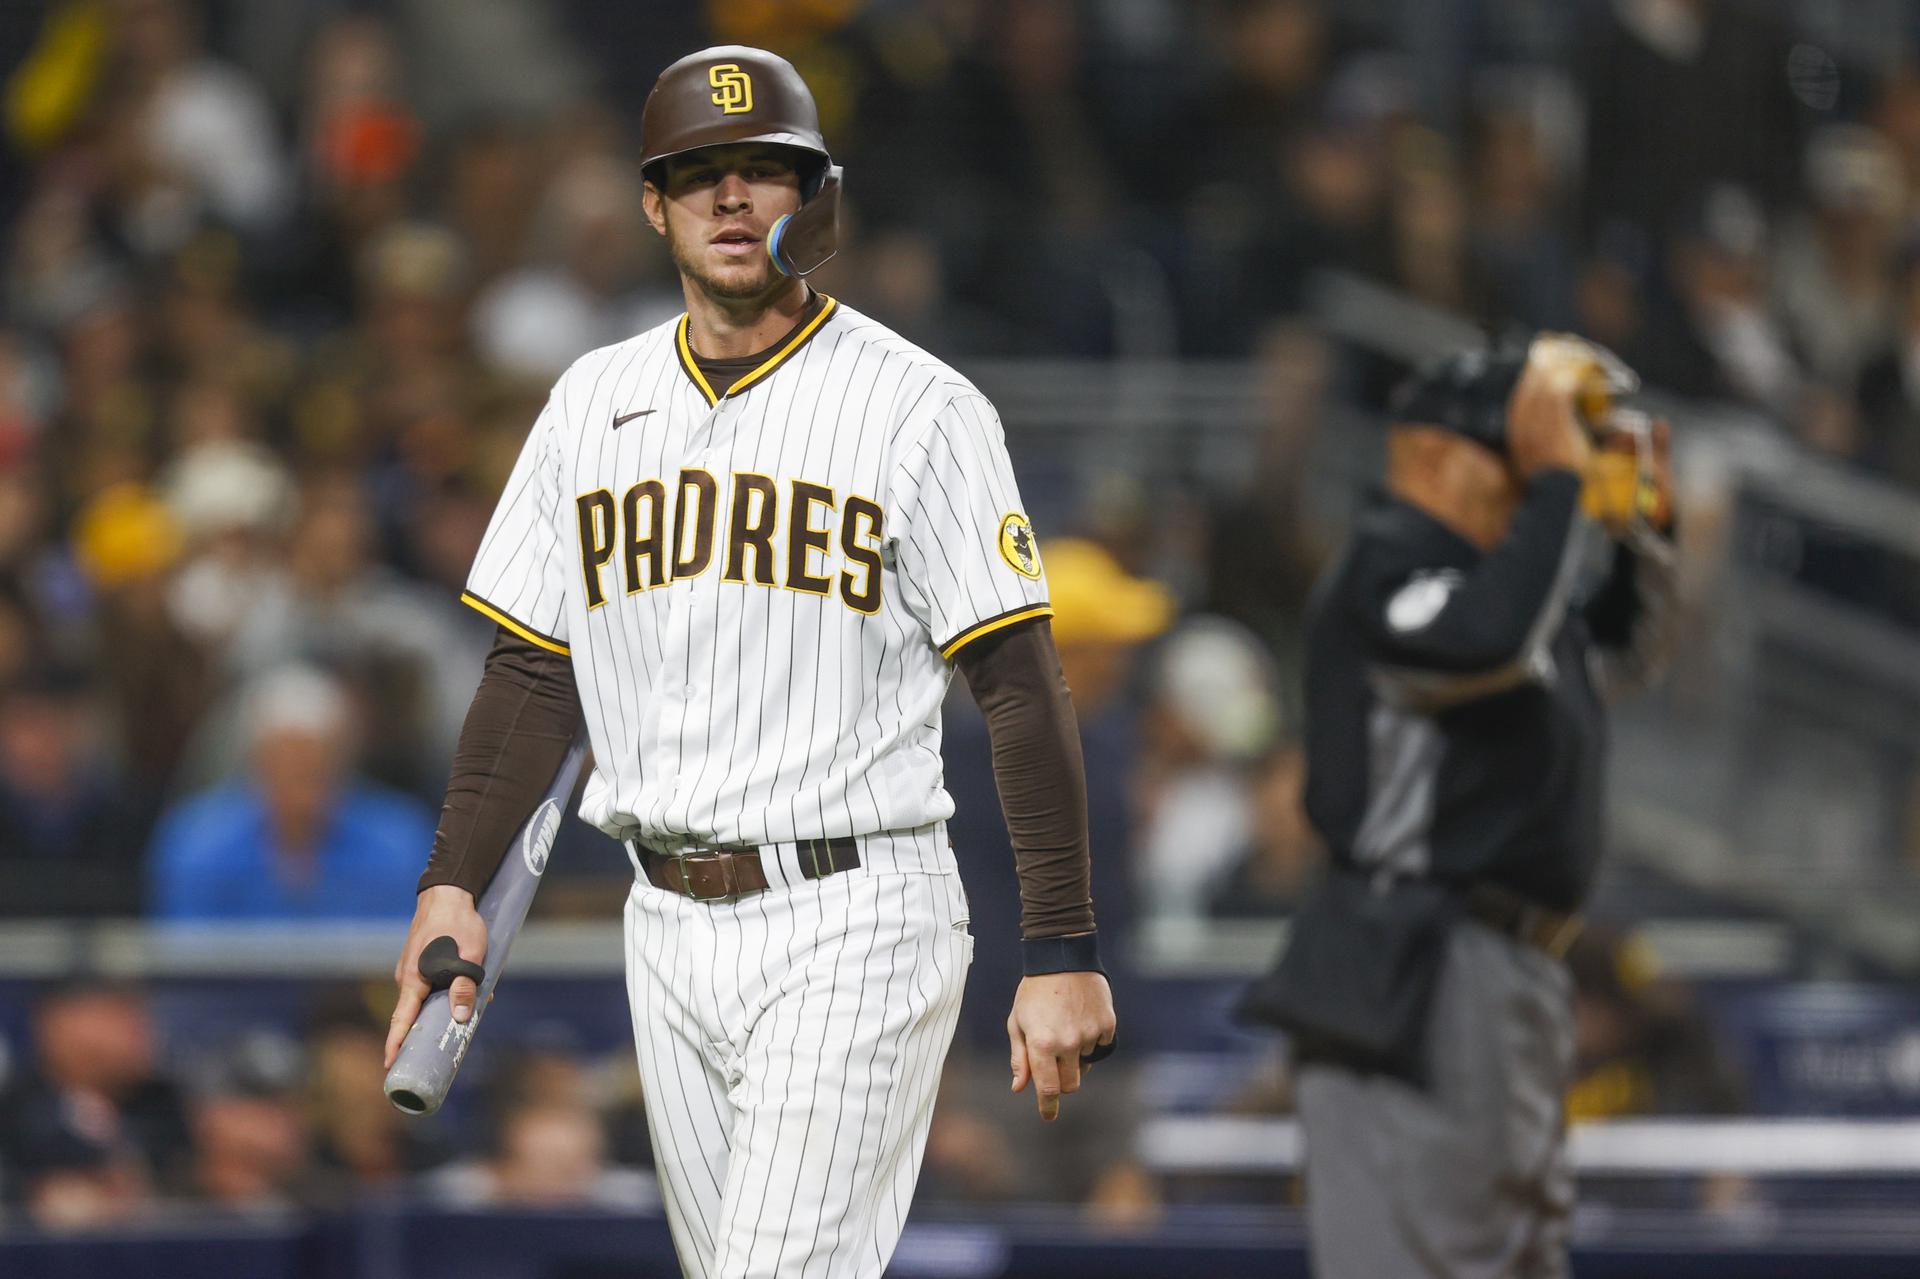 The Padres Current Winning Streak- By the Numbers